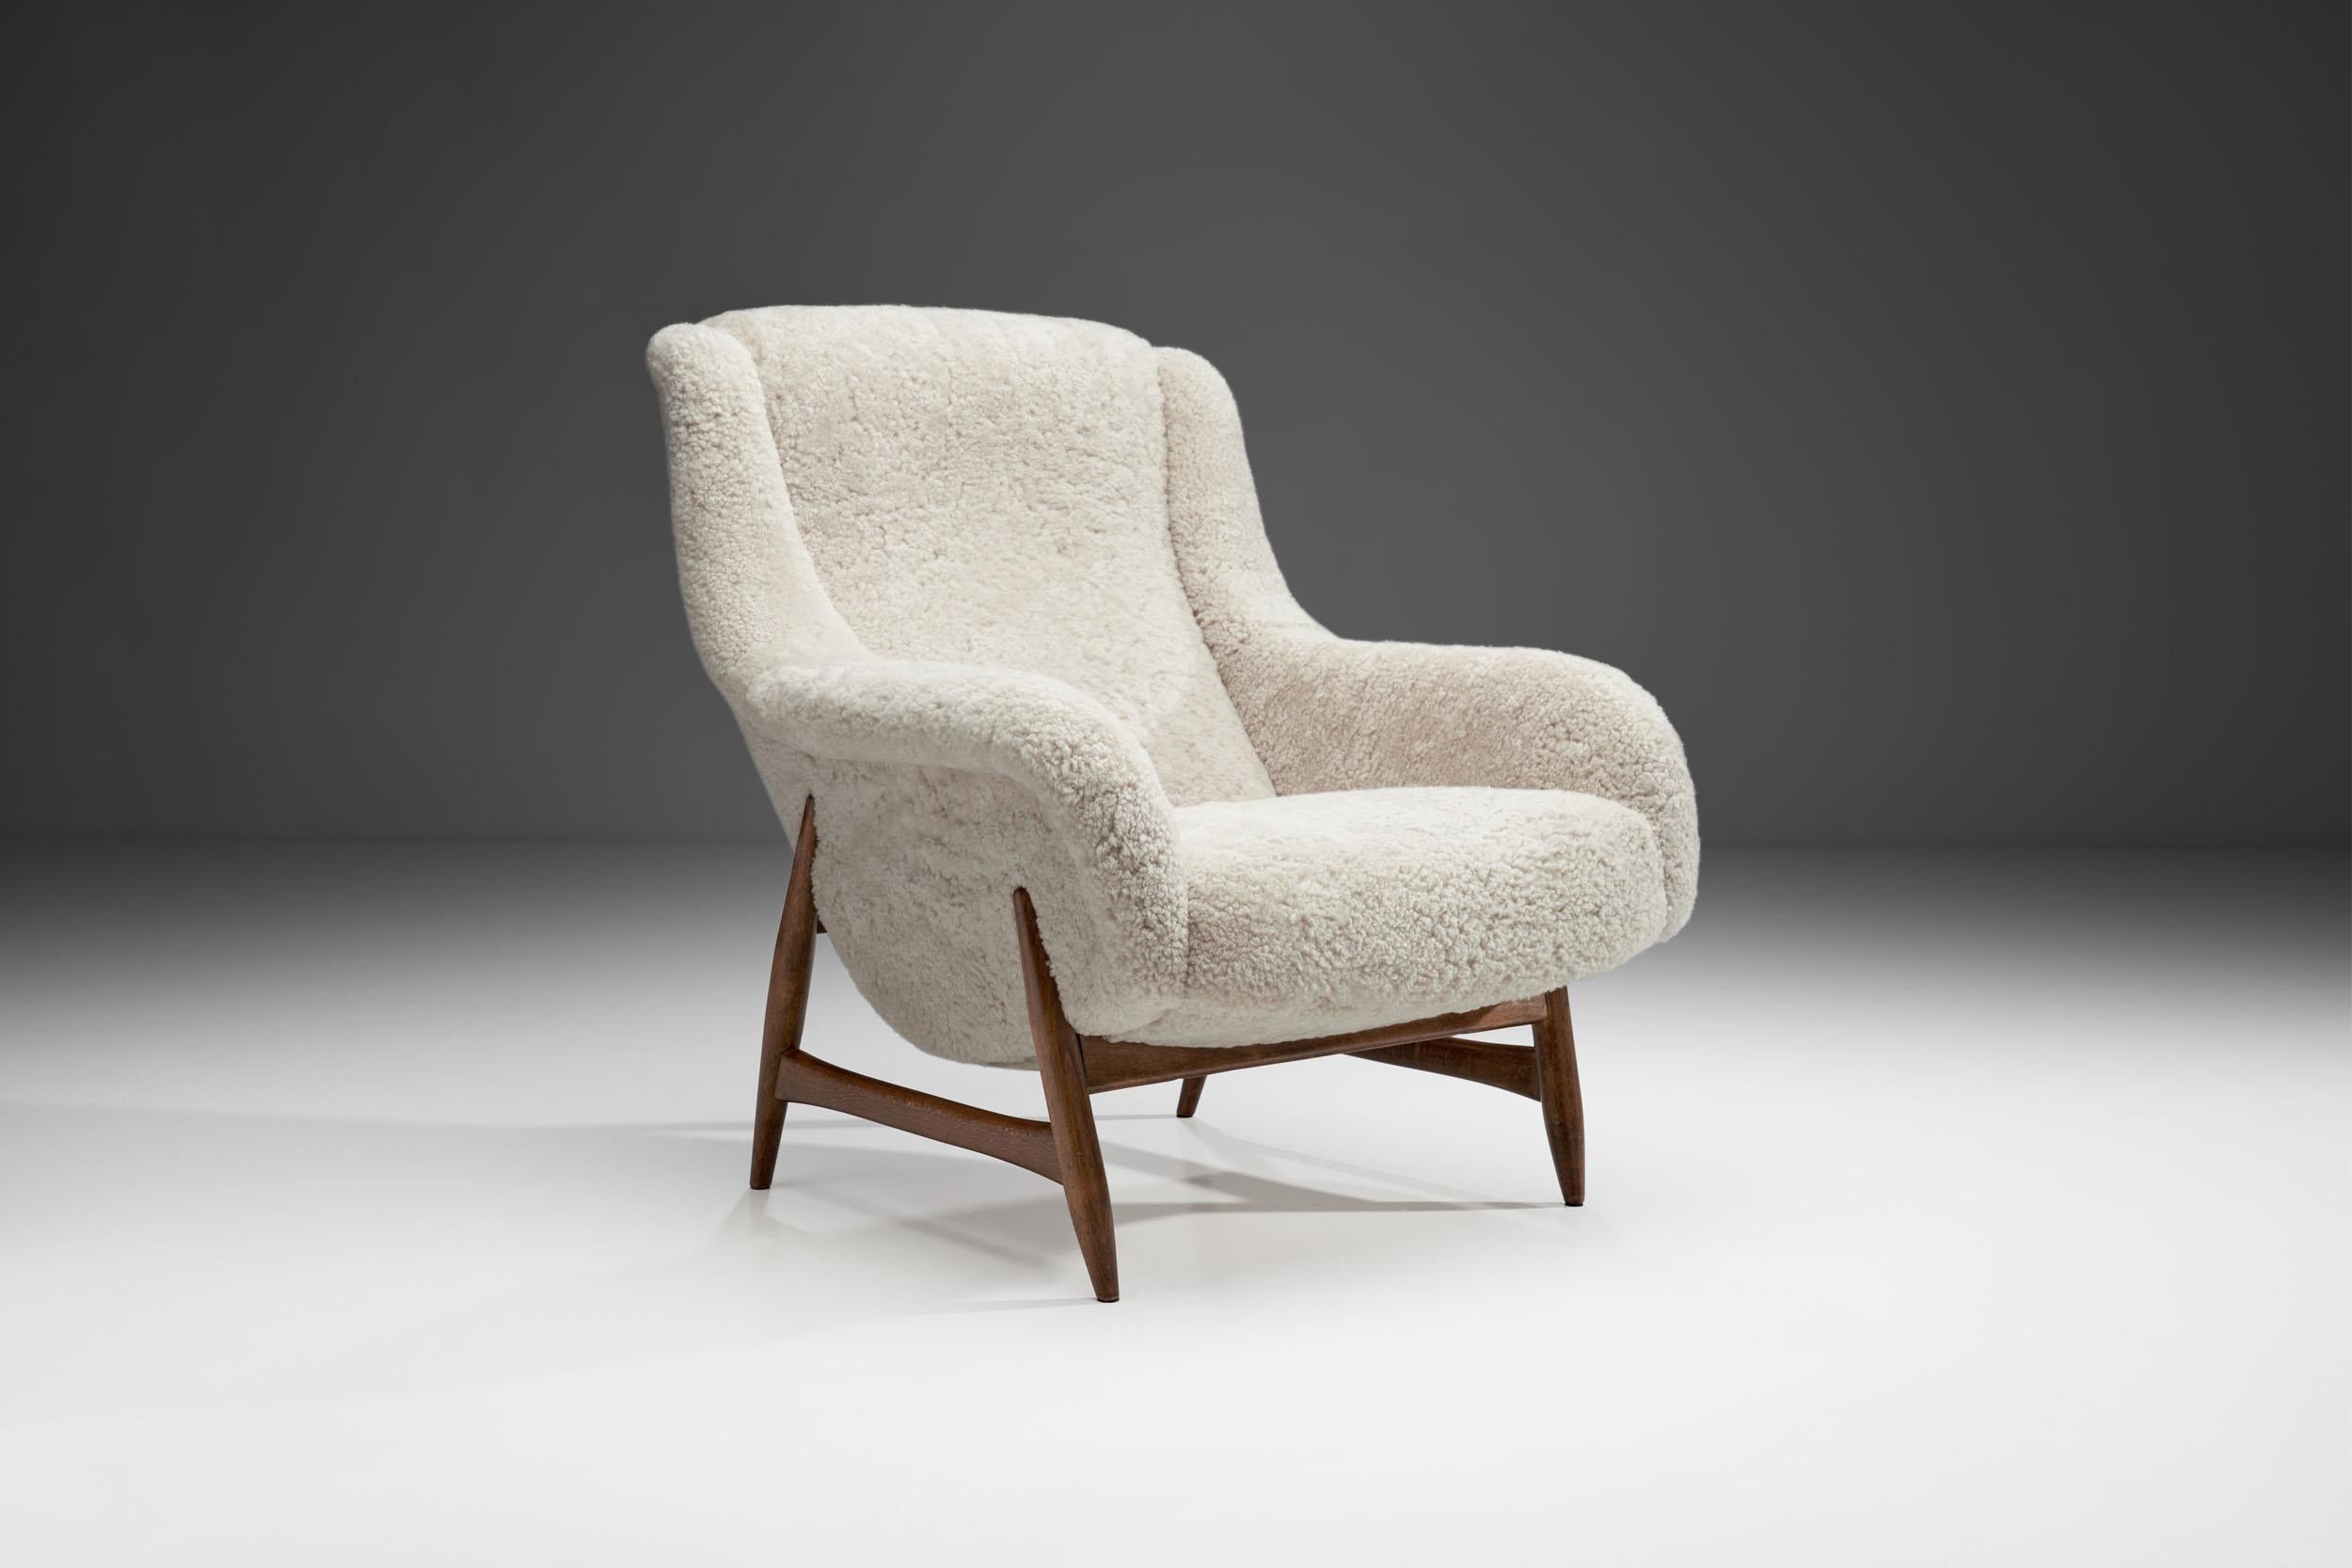 This cosy midcentury lounge chair by Bengt Ruda is one of the designer’s rarest designs. The combination of the Swedish designer’s idea and the Dutch manufactury’s execution is exceptional.

The beautiful teak wooden frame supports the upholstered